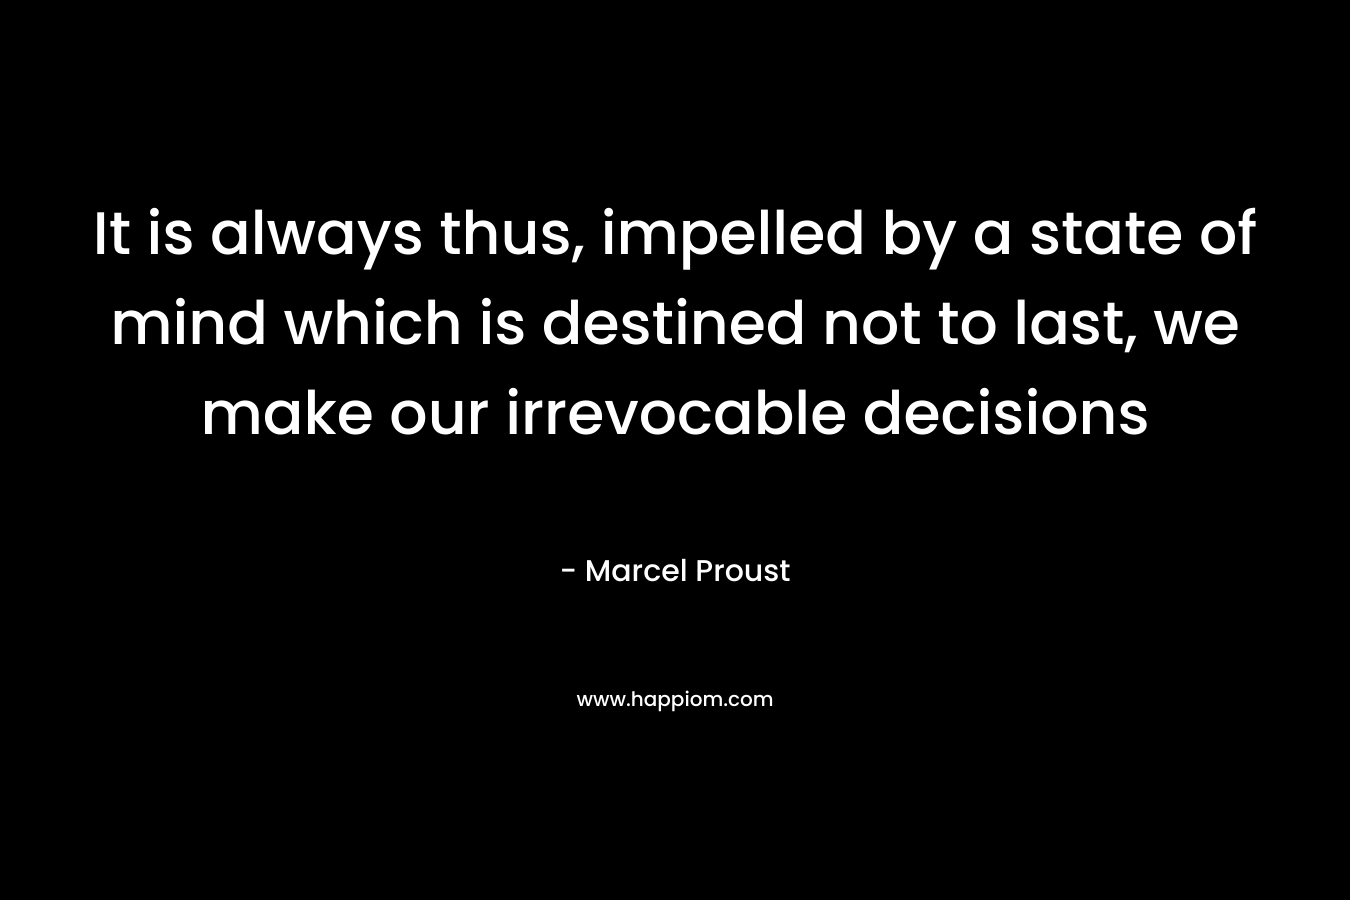 It is always thus, impelled by a state of mind which is destined not to last, we make our irrevocable decisions